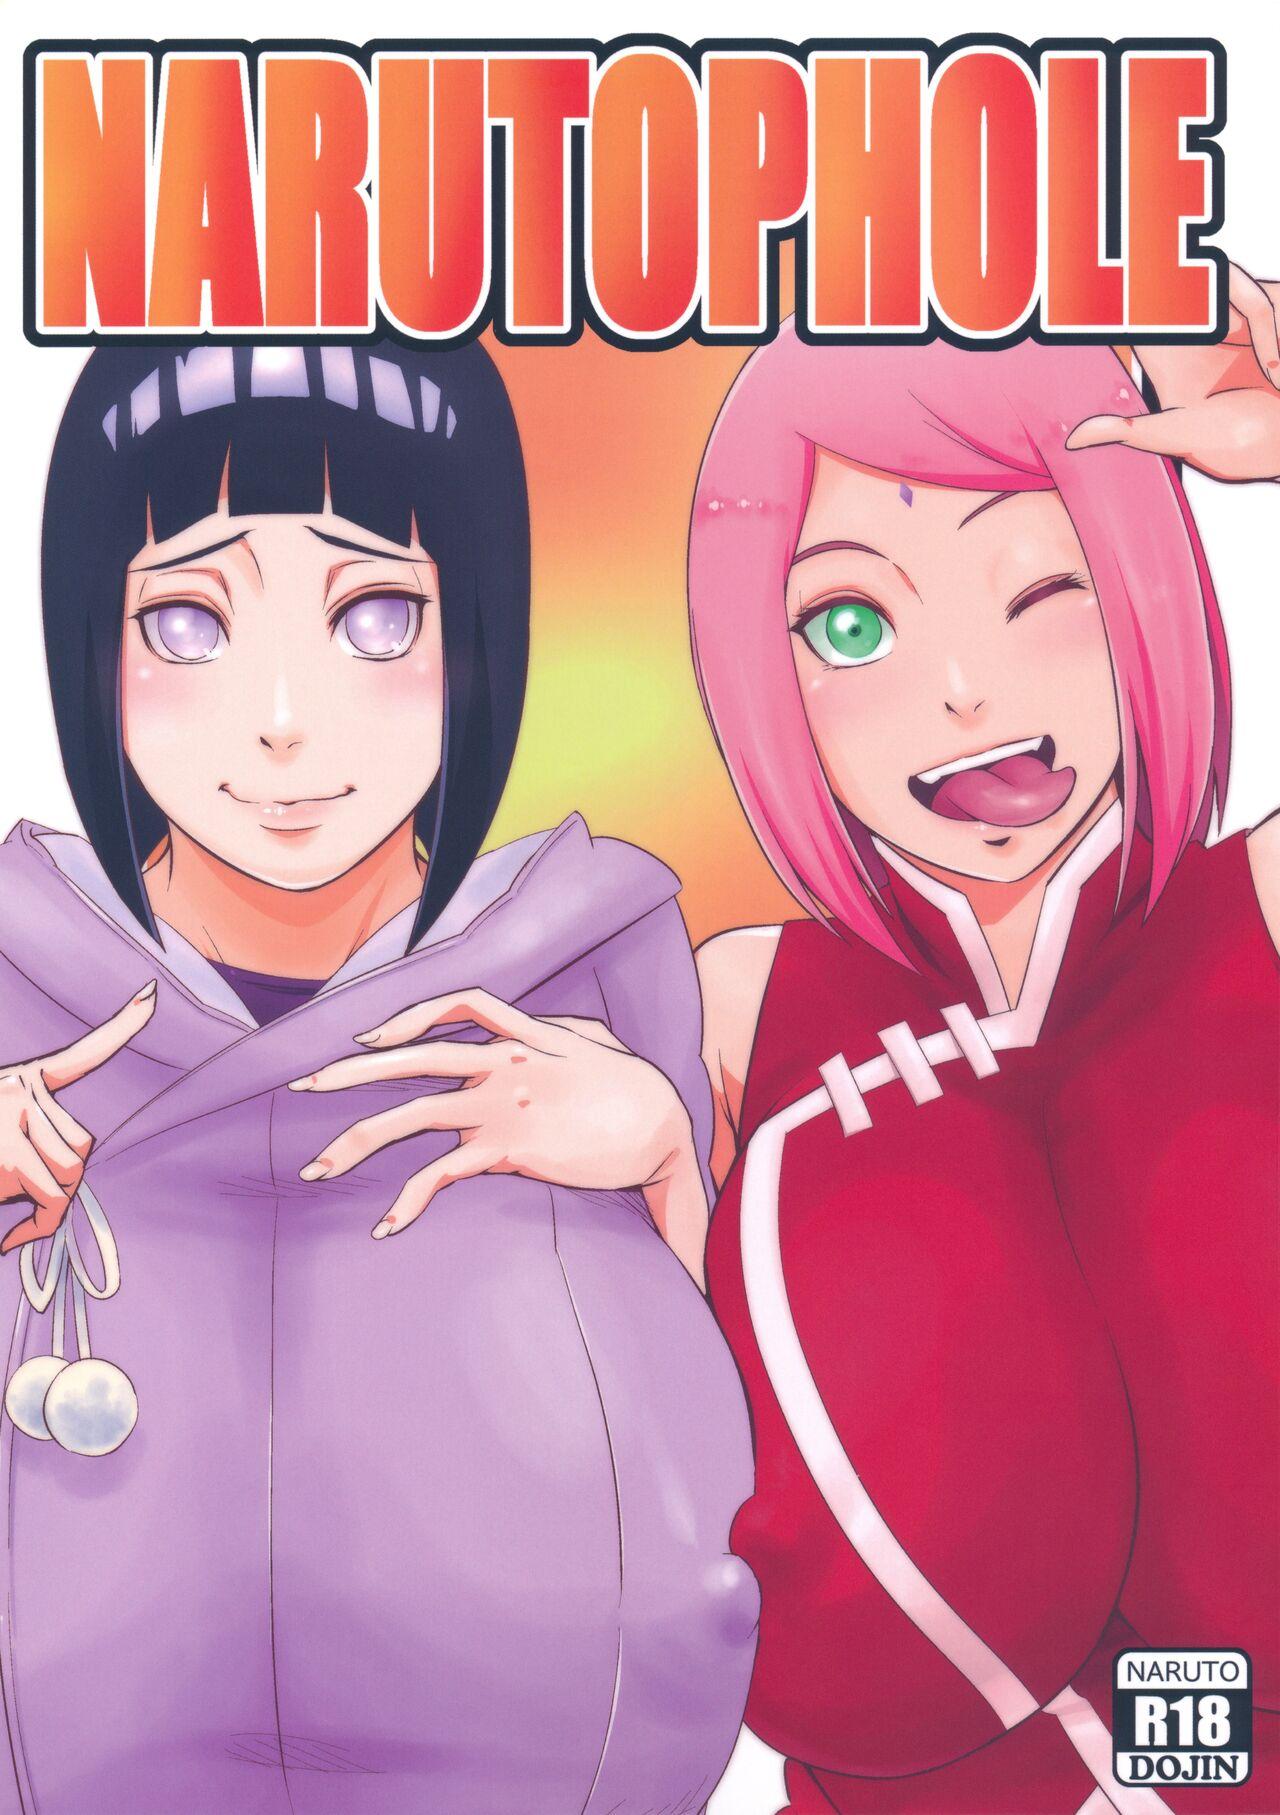 Scissoring NARUTOPHOLE - Naruto Hot Girls Getting Fucked - Page 1